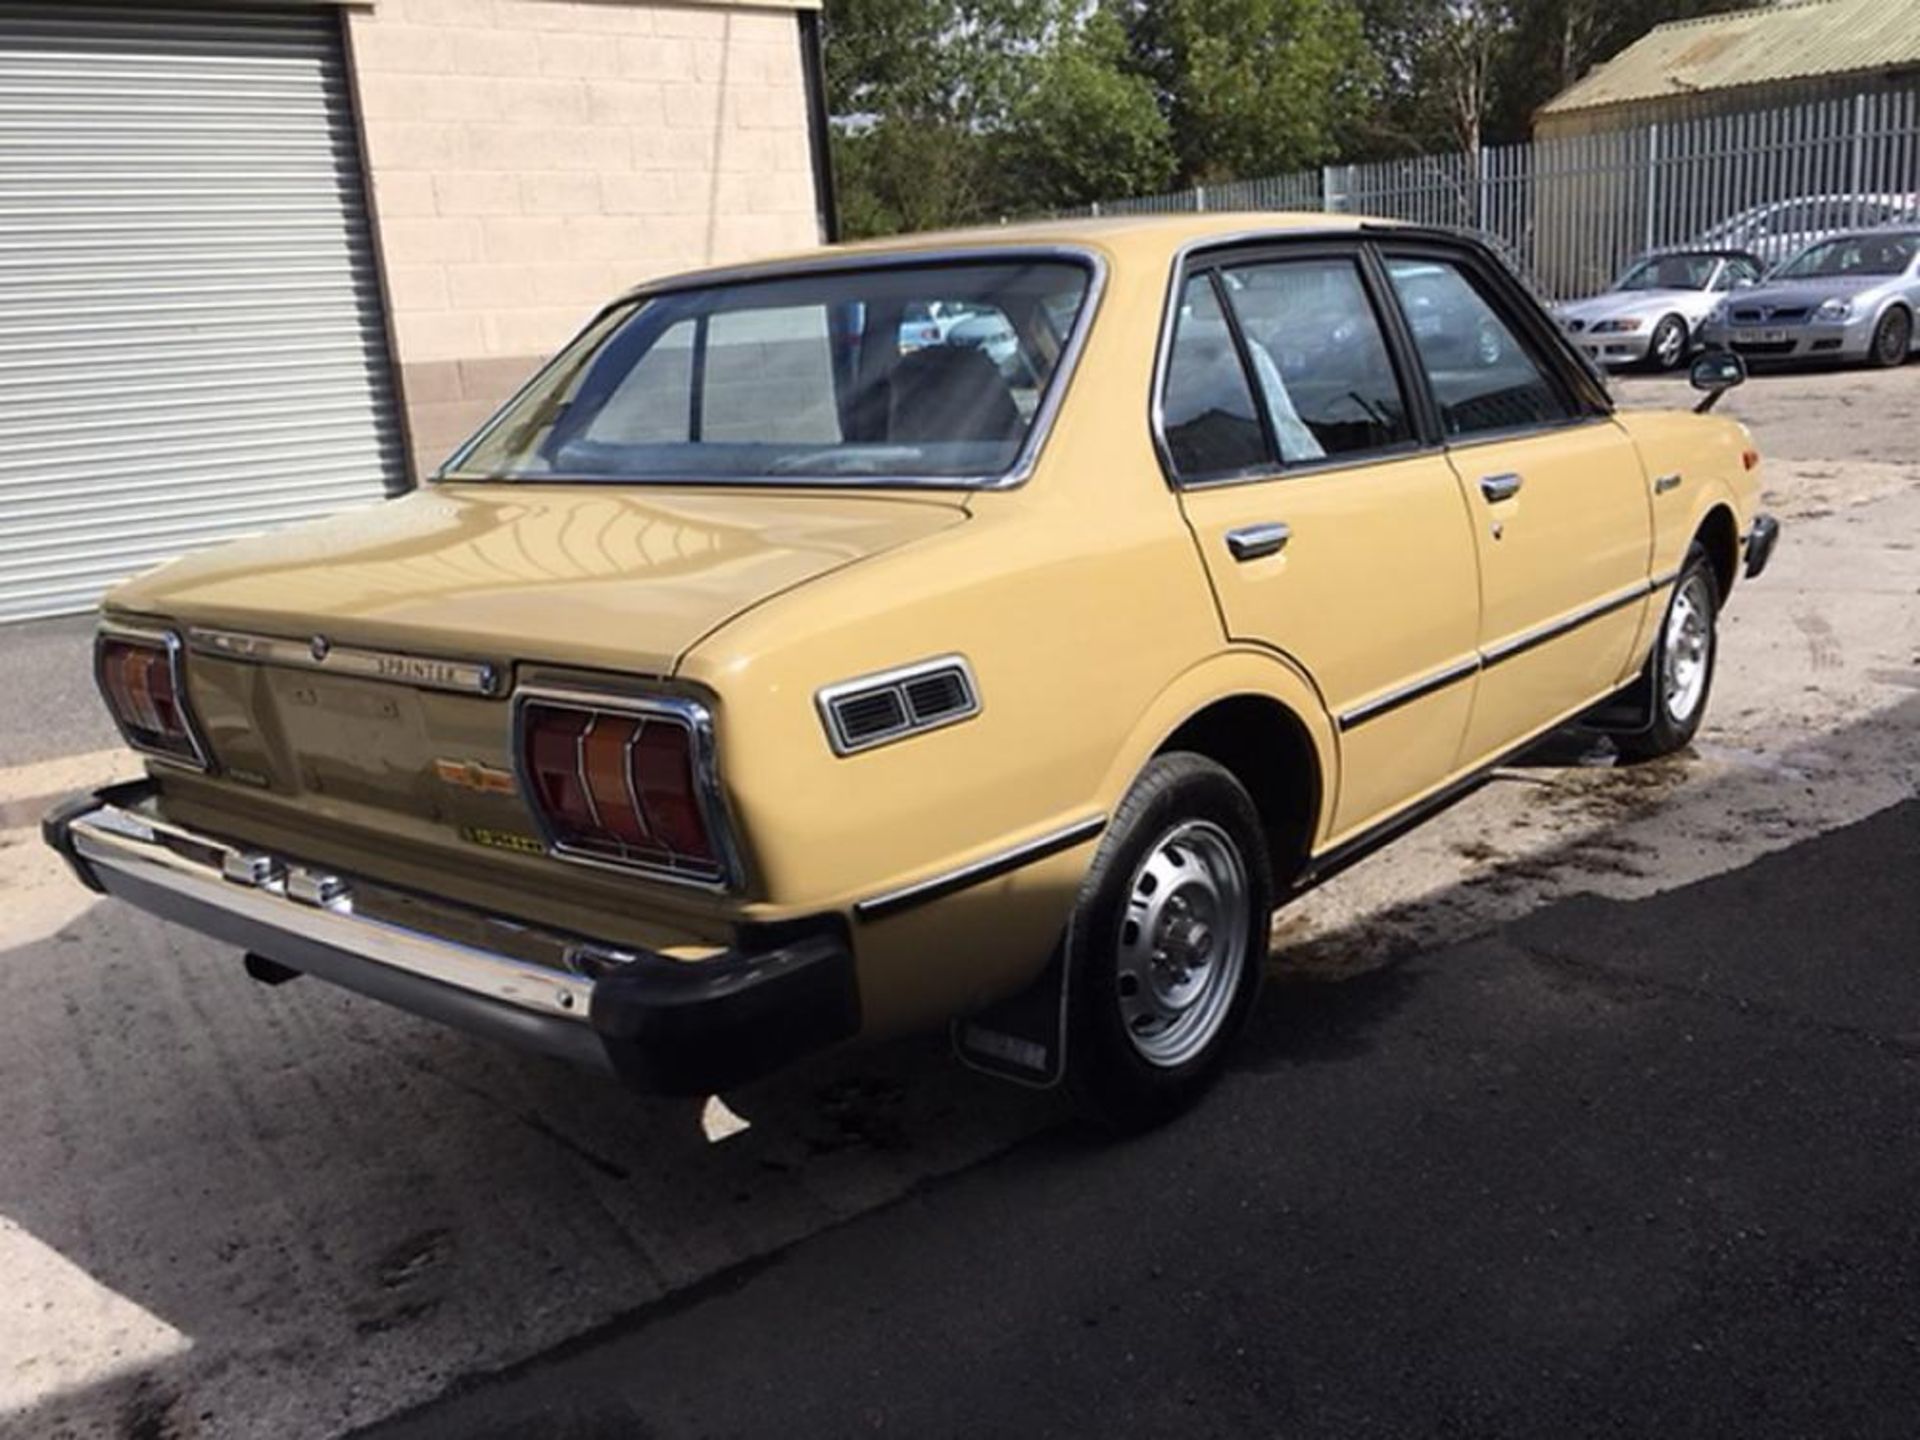 1979 Toyota Corolla Sprinter From Japan - Image 5 of 35